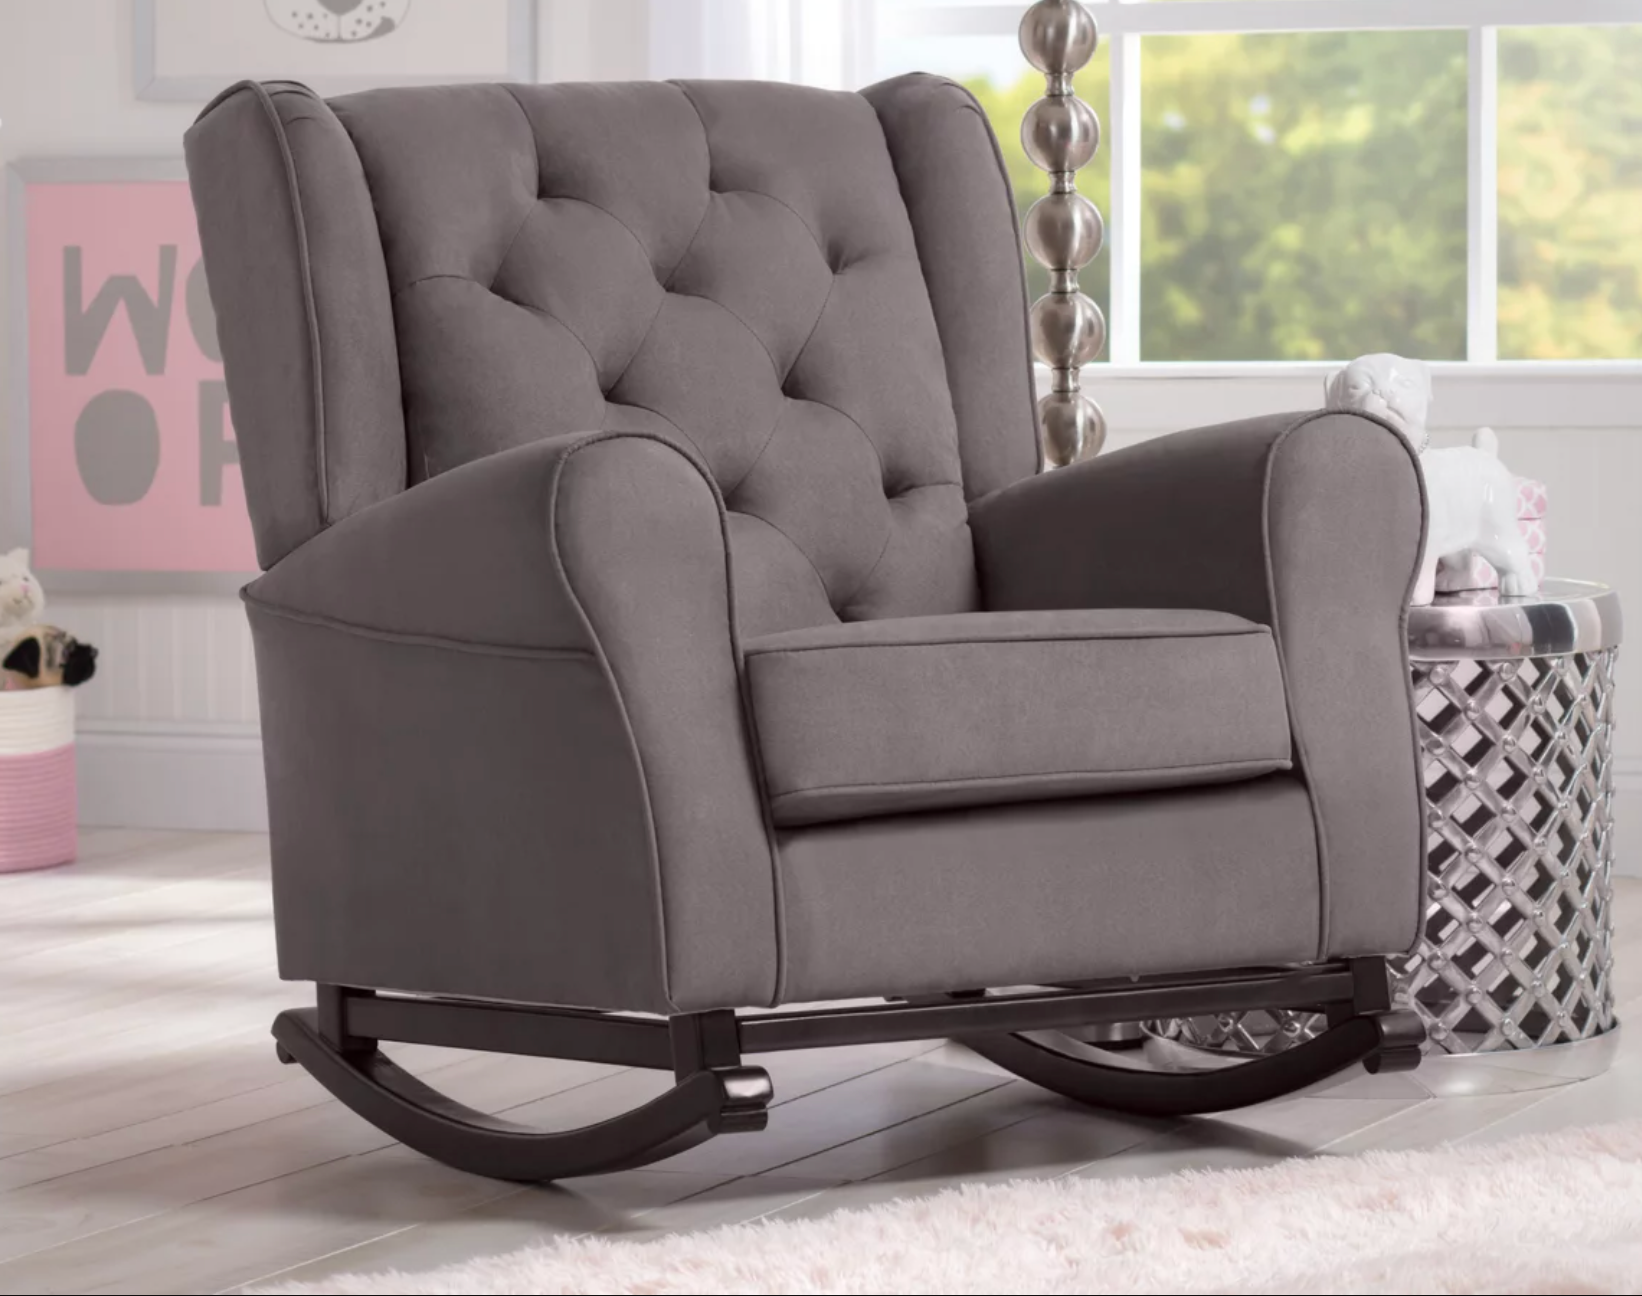 Gray plush rocking chair with rounded armrests and a tufted backing with metal curved legs on hardwood floor